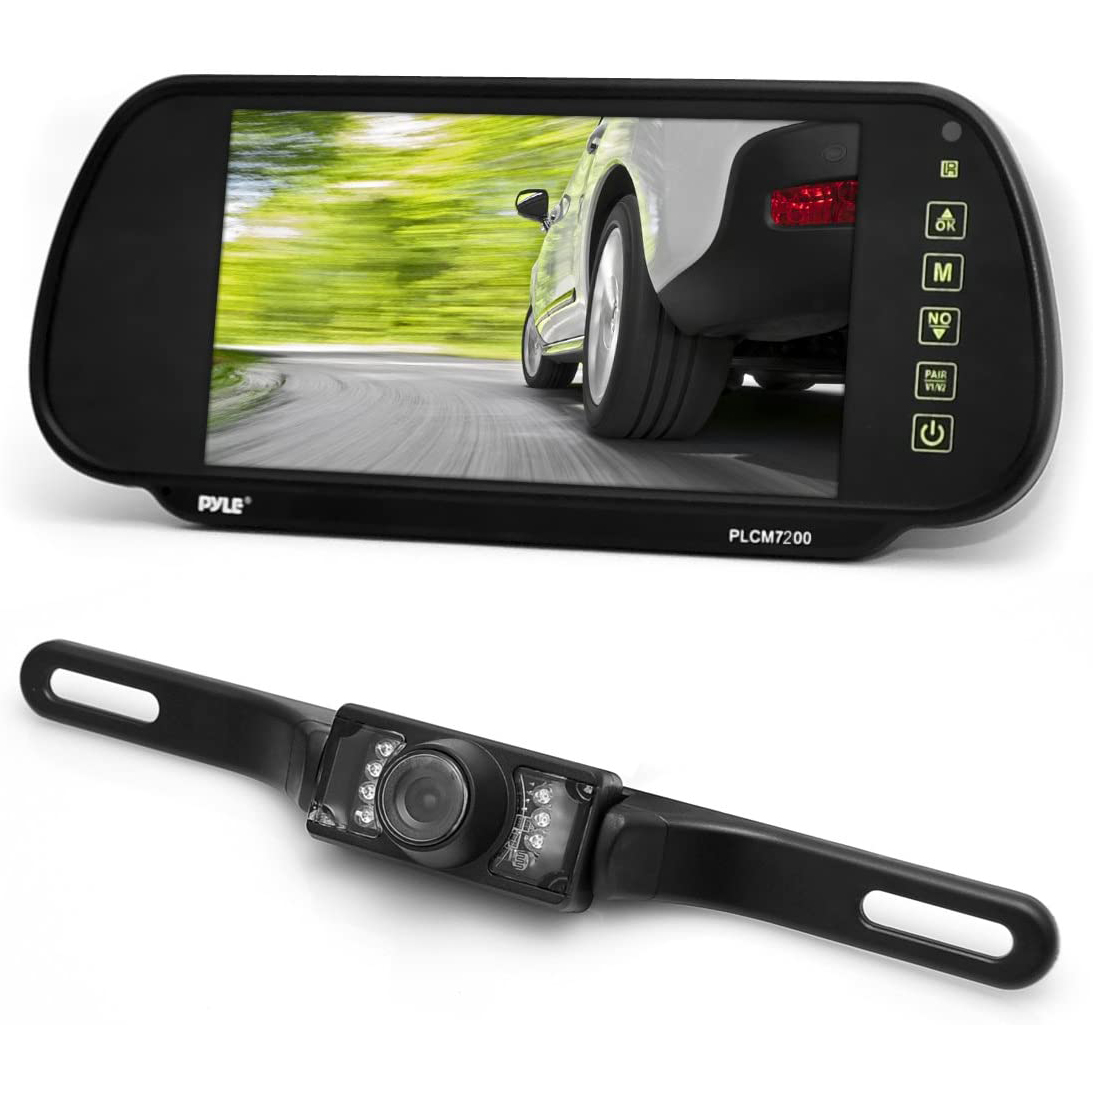 Pyle PLCM7200 7 Inch Rearview Mirror Monitor Screen Backup Camera w/Night Vision - image 1 of 2